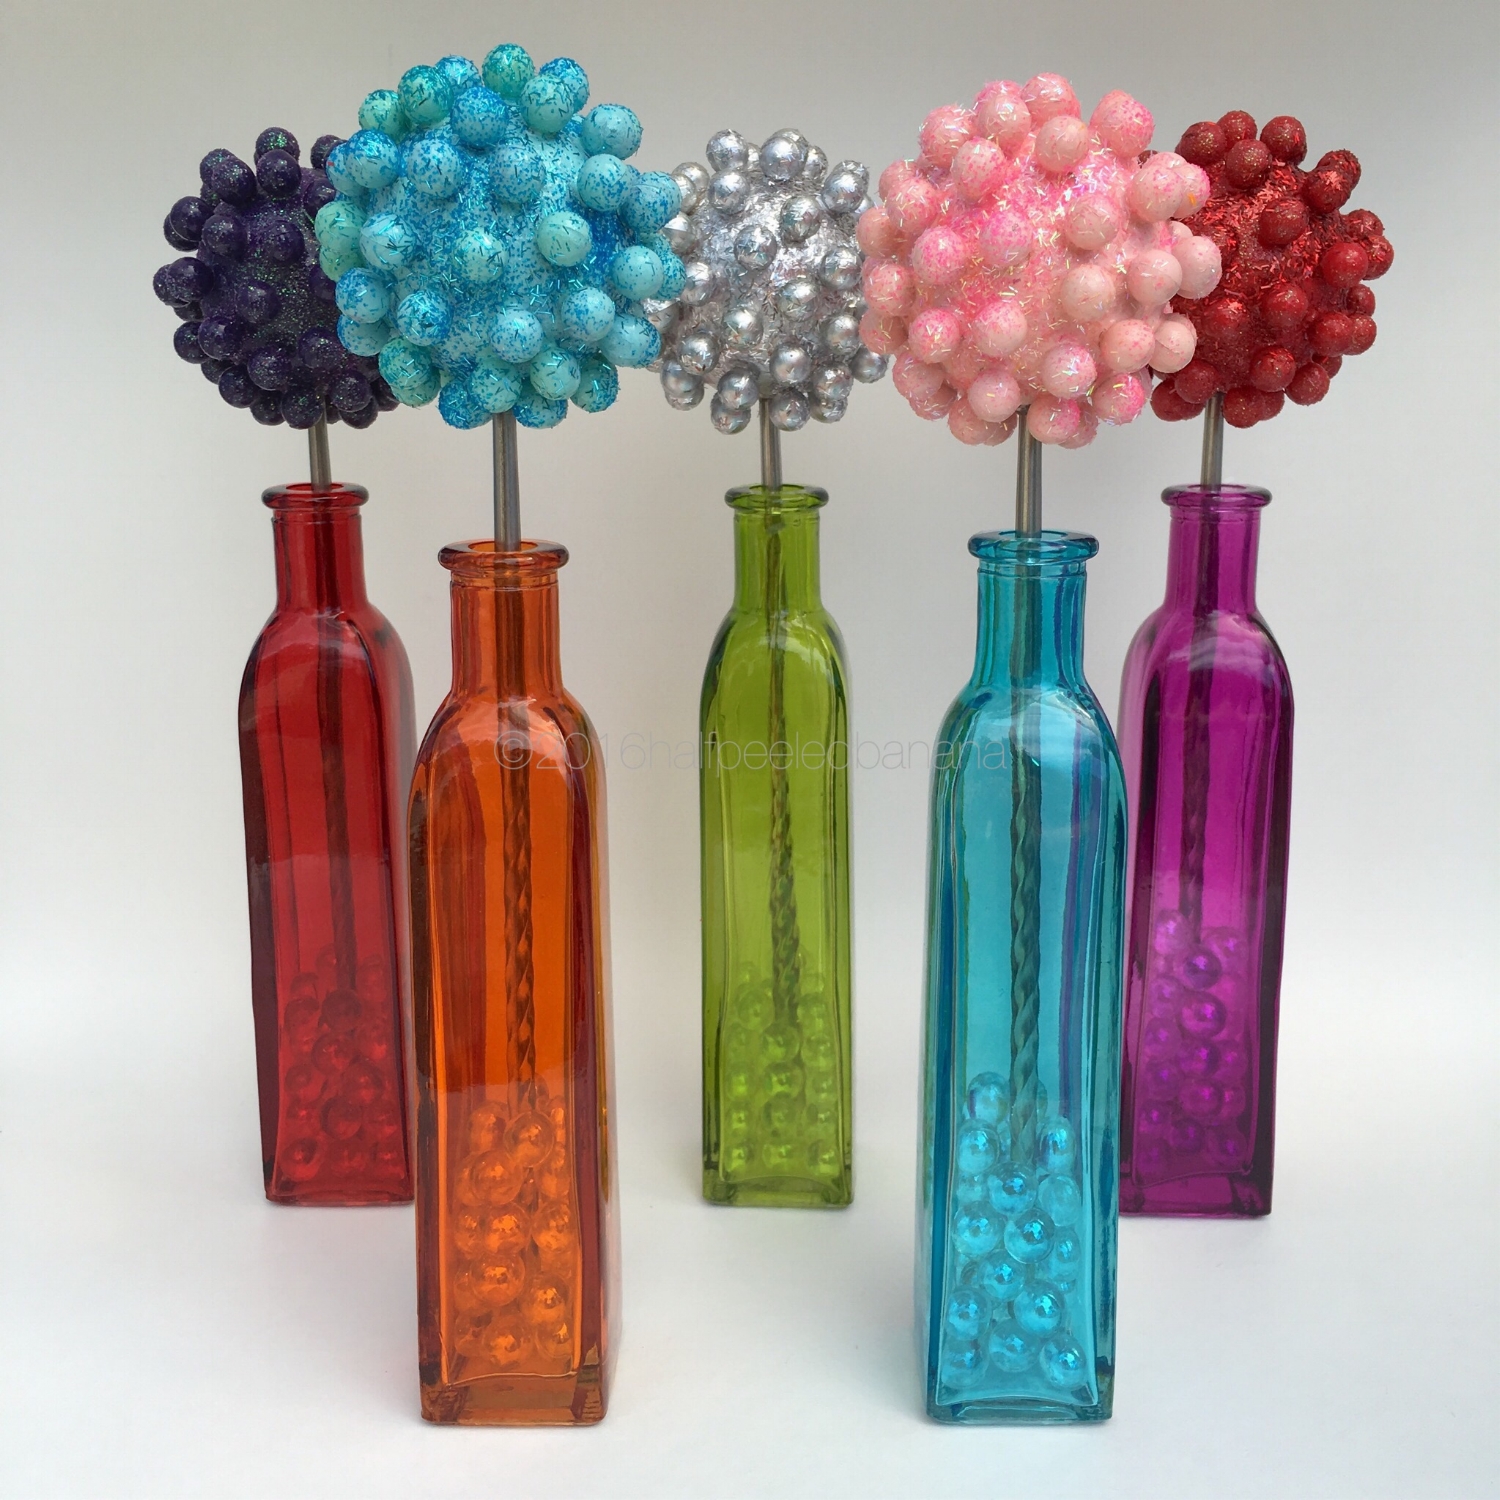 bright tabletop flowers 3" nubs style in dark purple, light blue,, silver, light pink and red